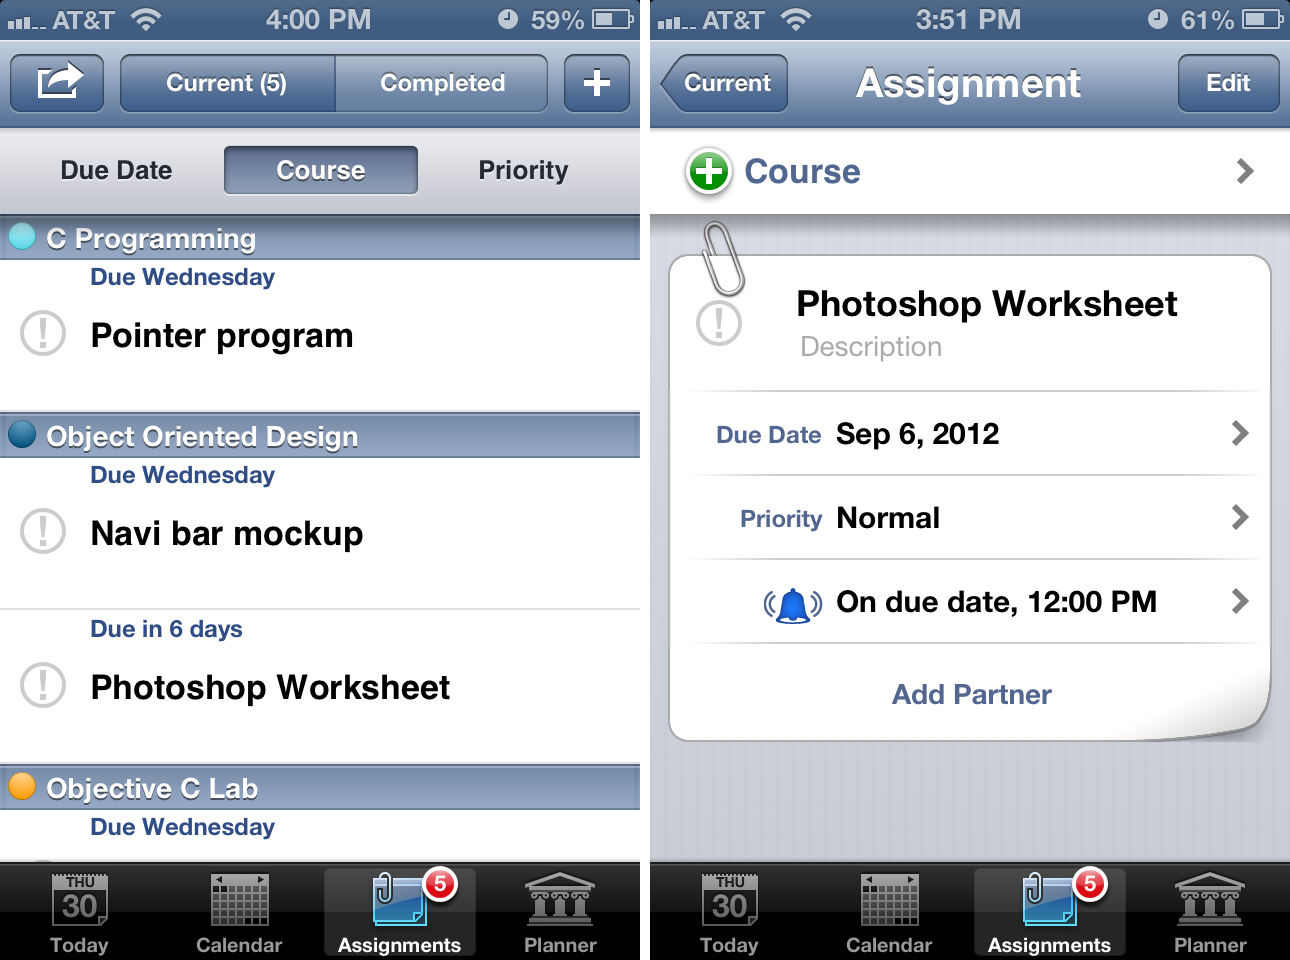 iStudiez Pro for iPhone adding assignments and tasks